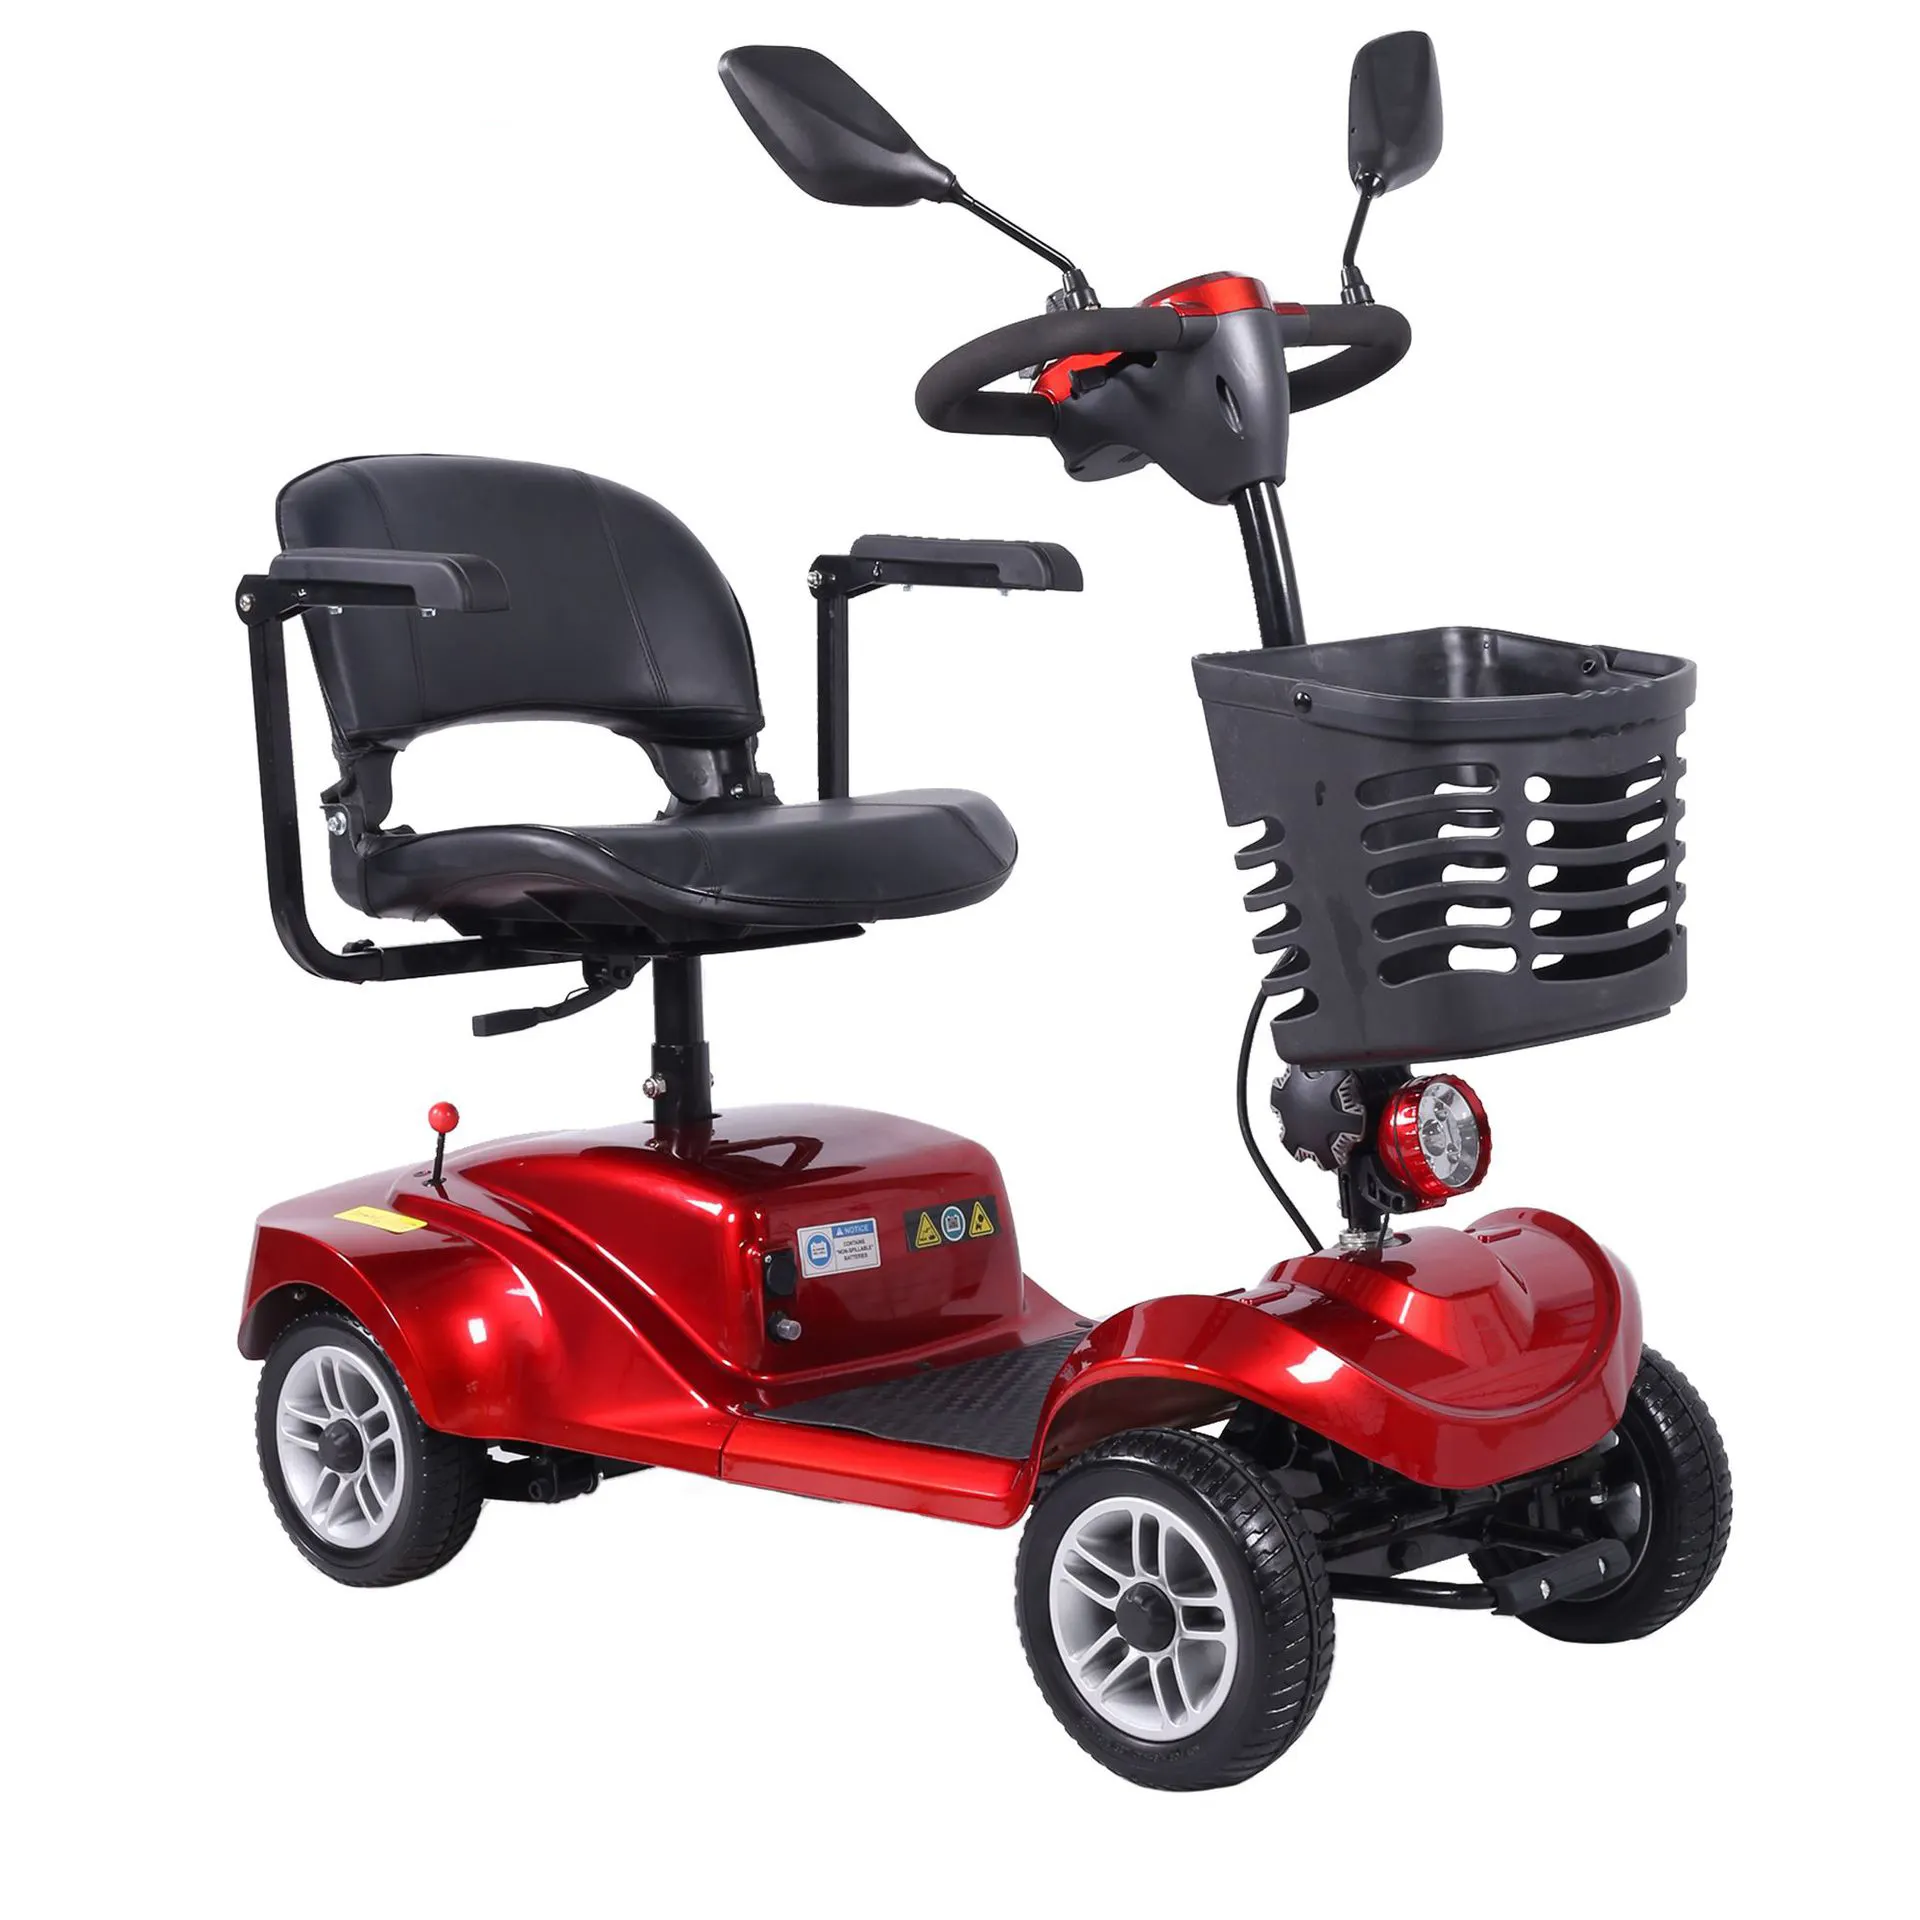 Chinese electric tricycle scooter handicapped motorized for sale for adults handicap scooter with basket disabled scooter